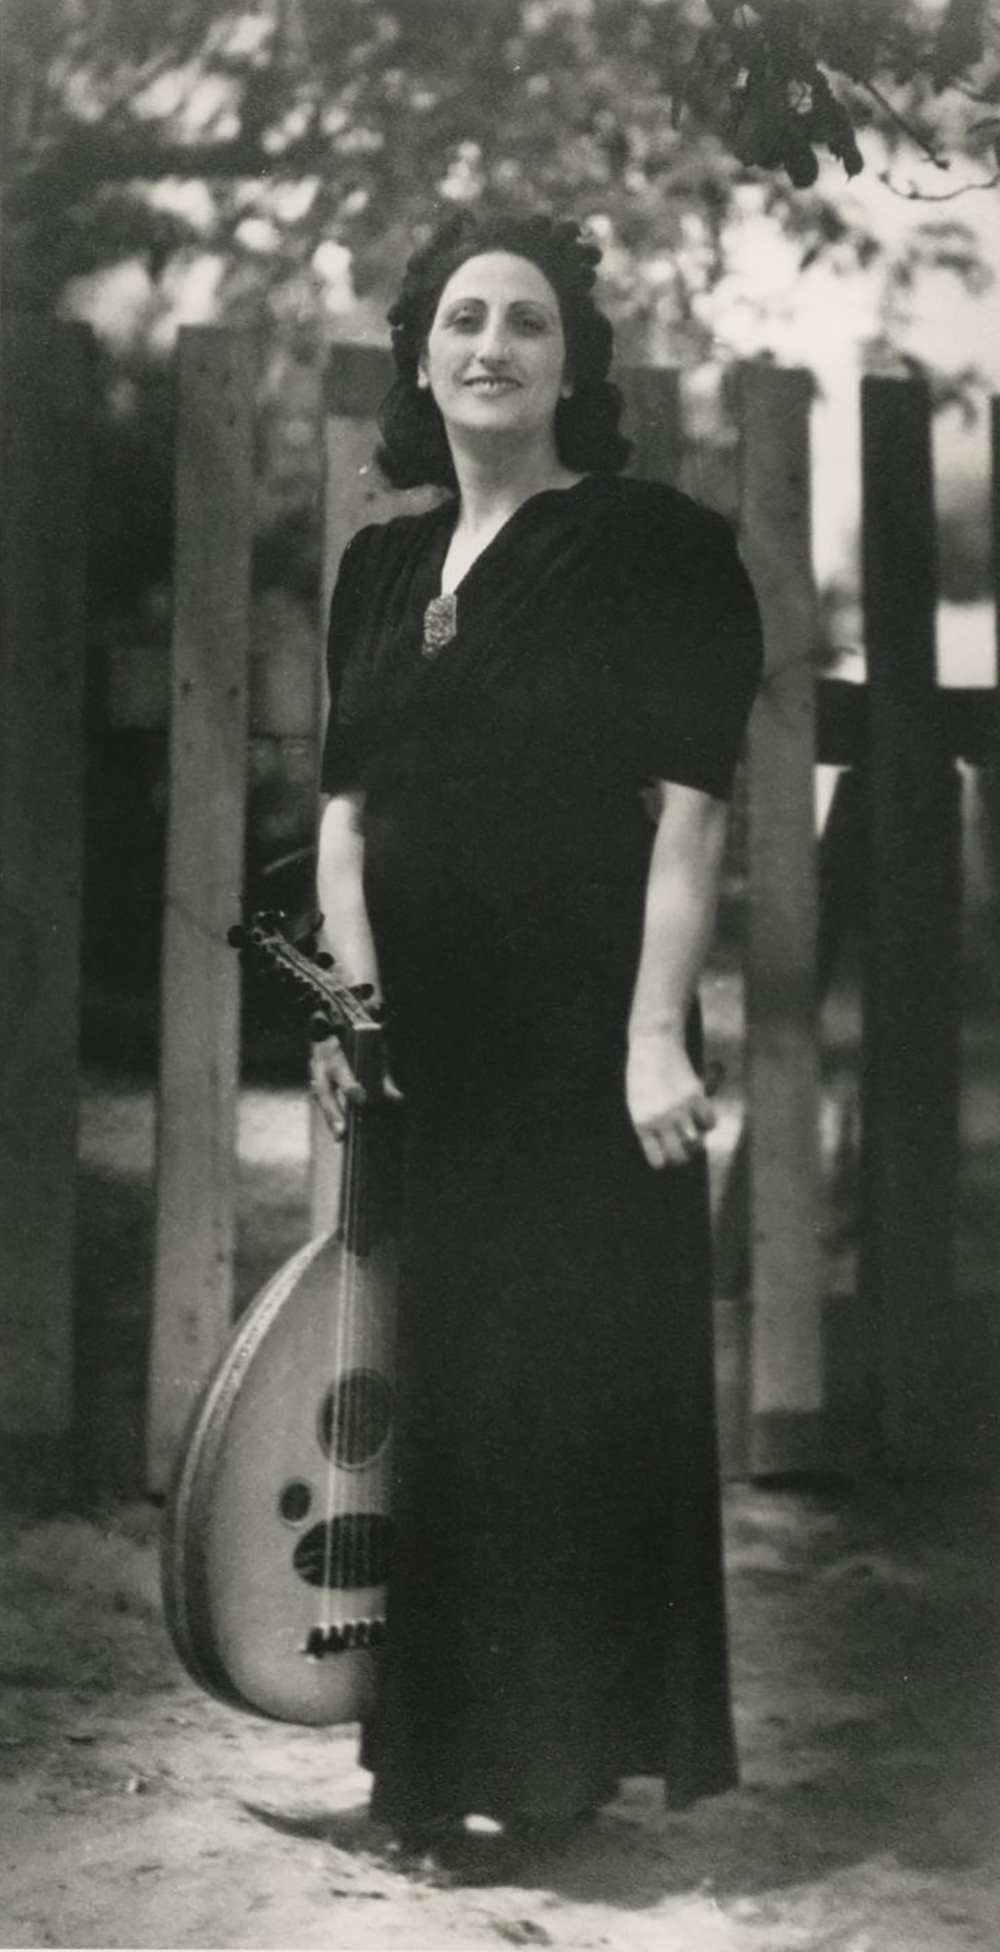 An Armenian woman in a long black dress stands in front of a fence, holding an oud.